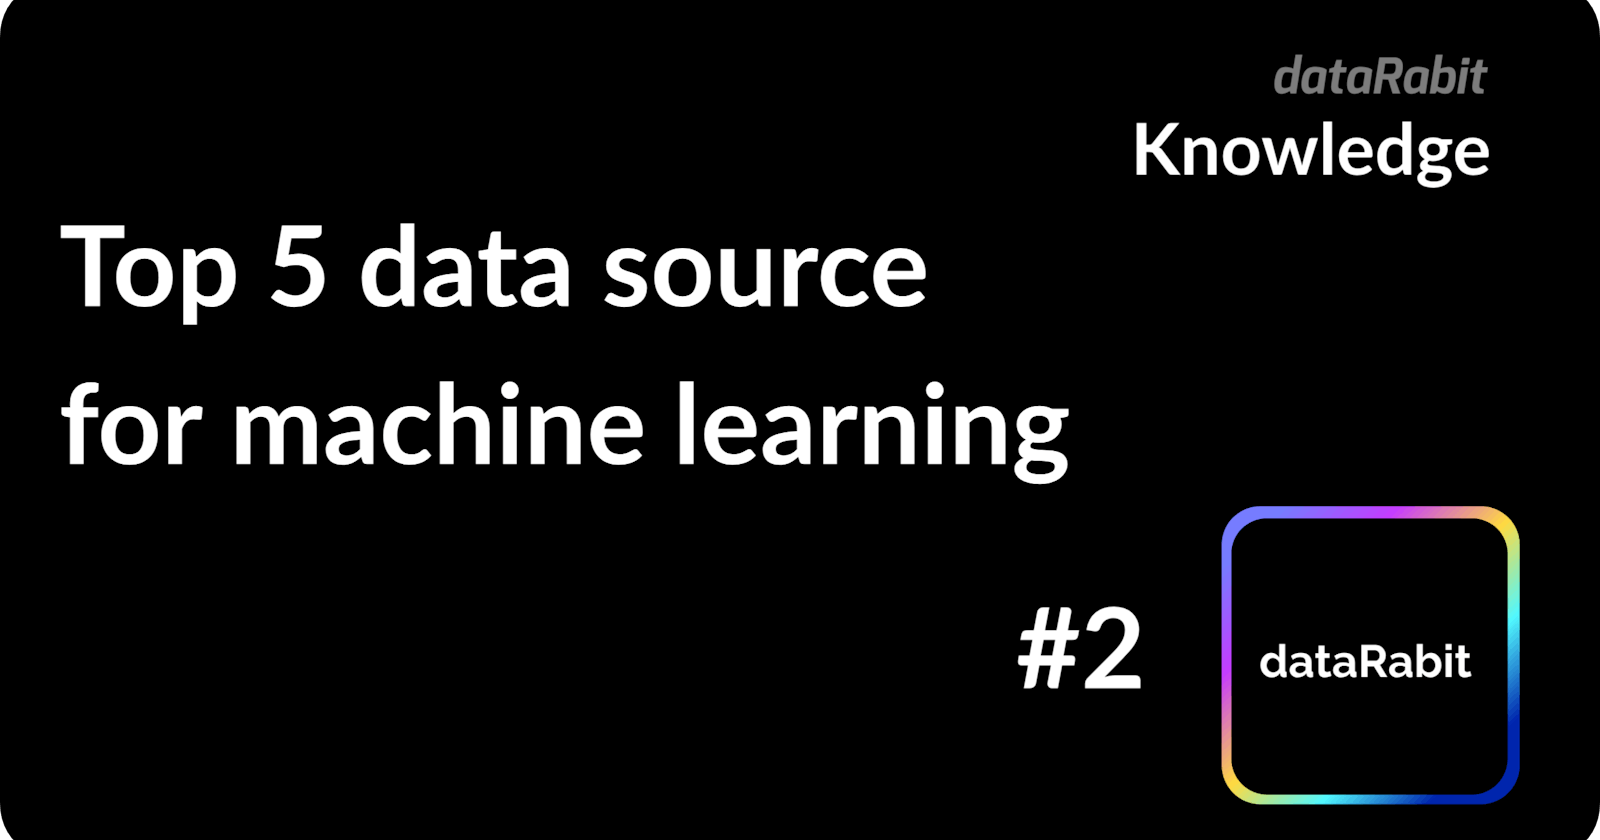 Top 5 source of data for machine learning